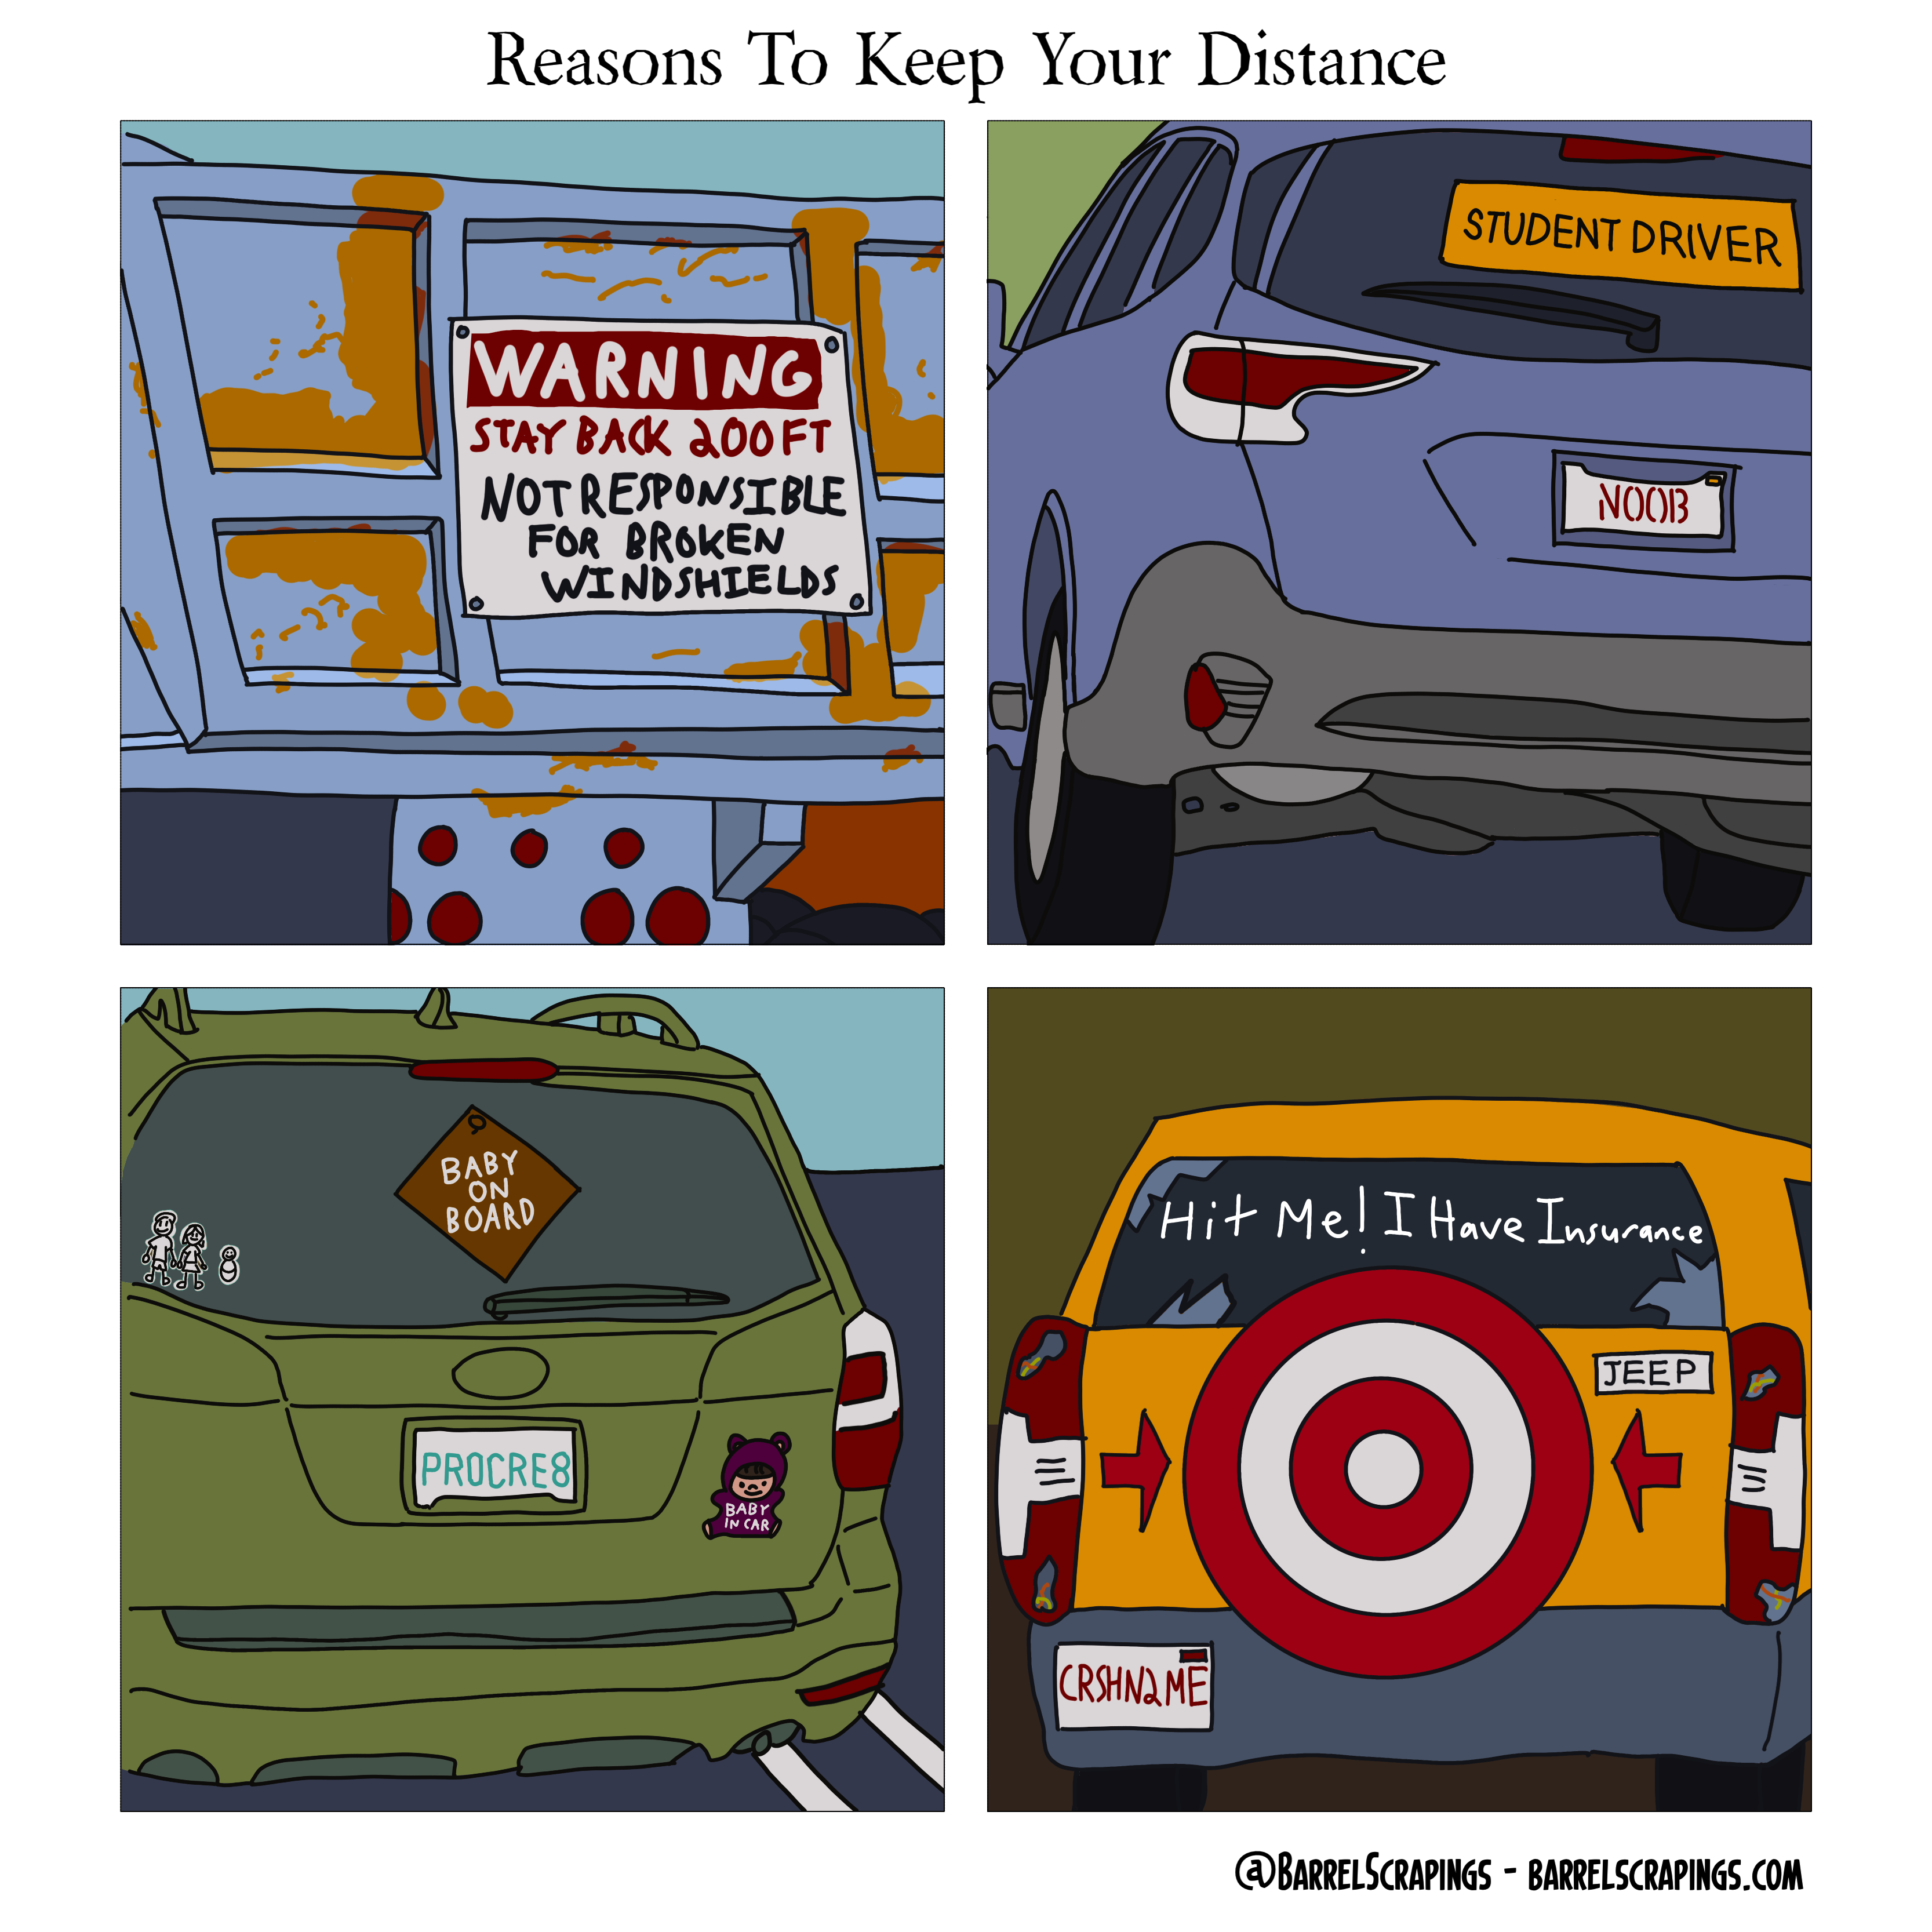 image from Reasons To Keep Your Distance